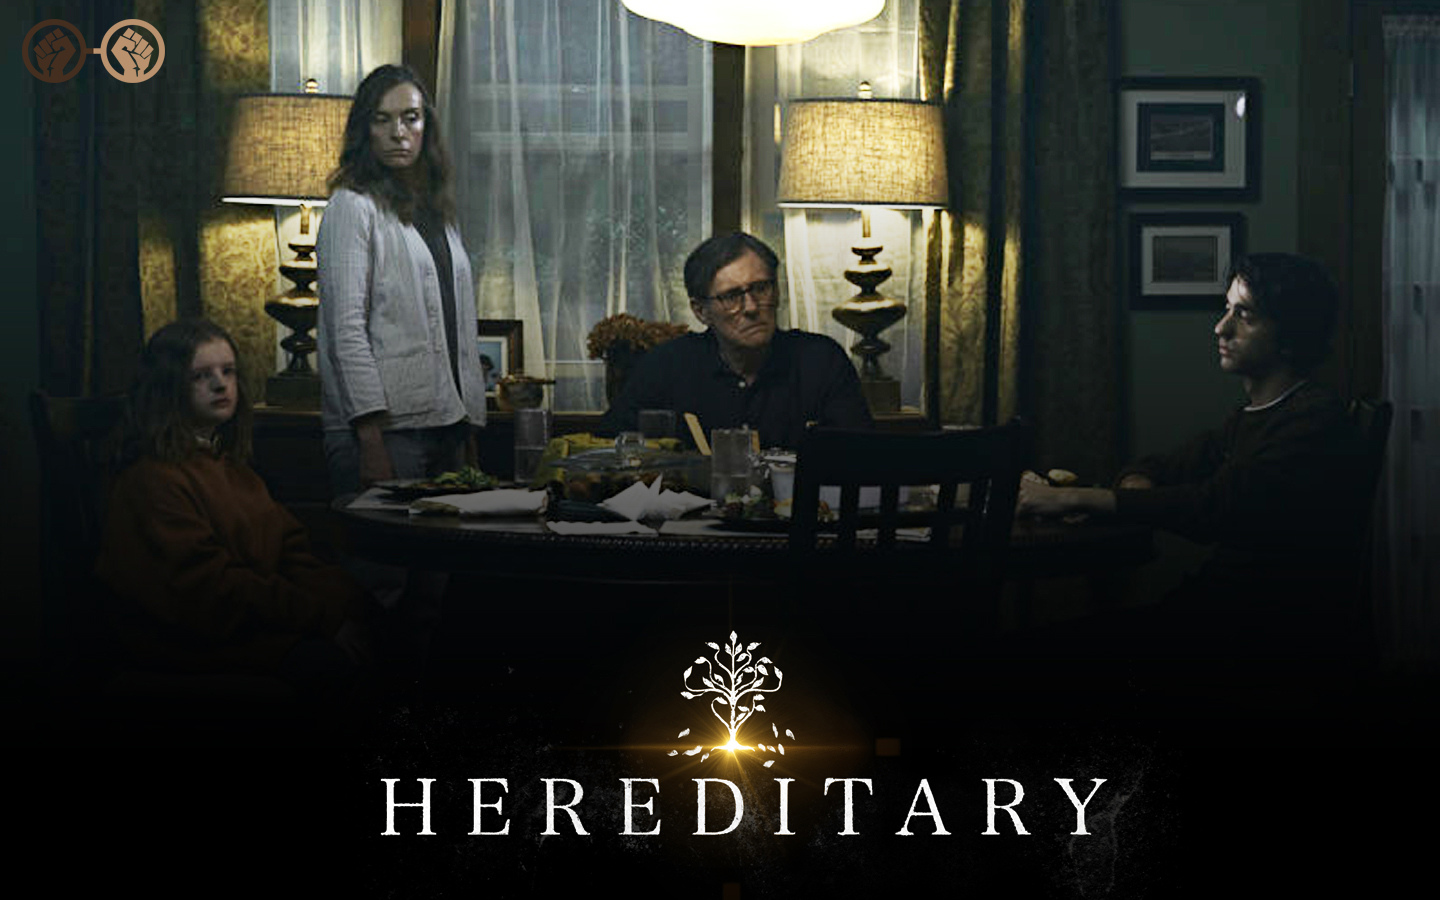 ‘Hereditary’ Questions and Theories (Warning: Spoilers)